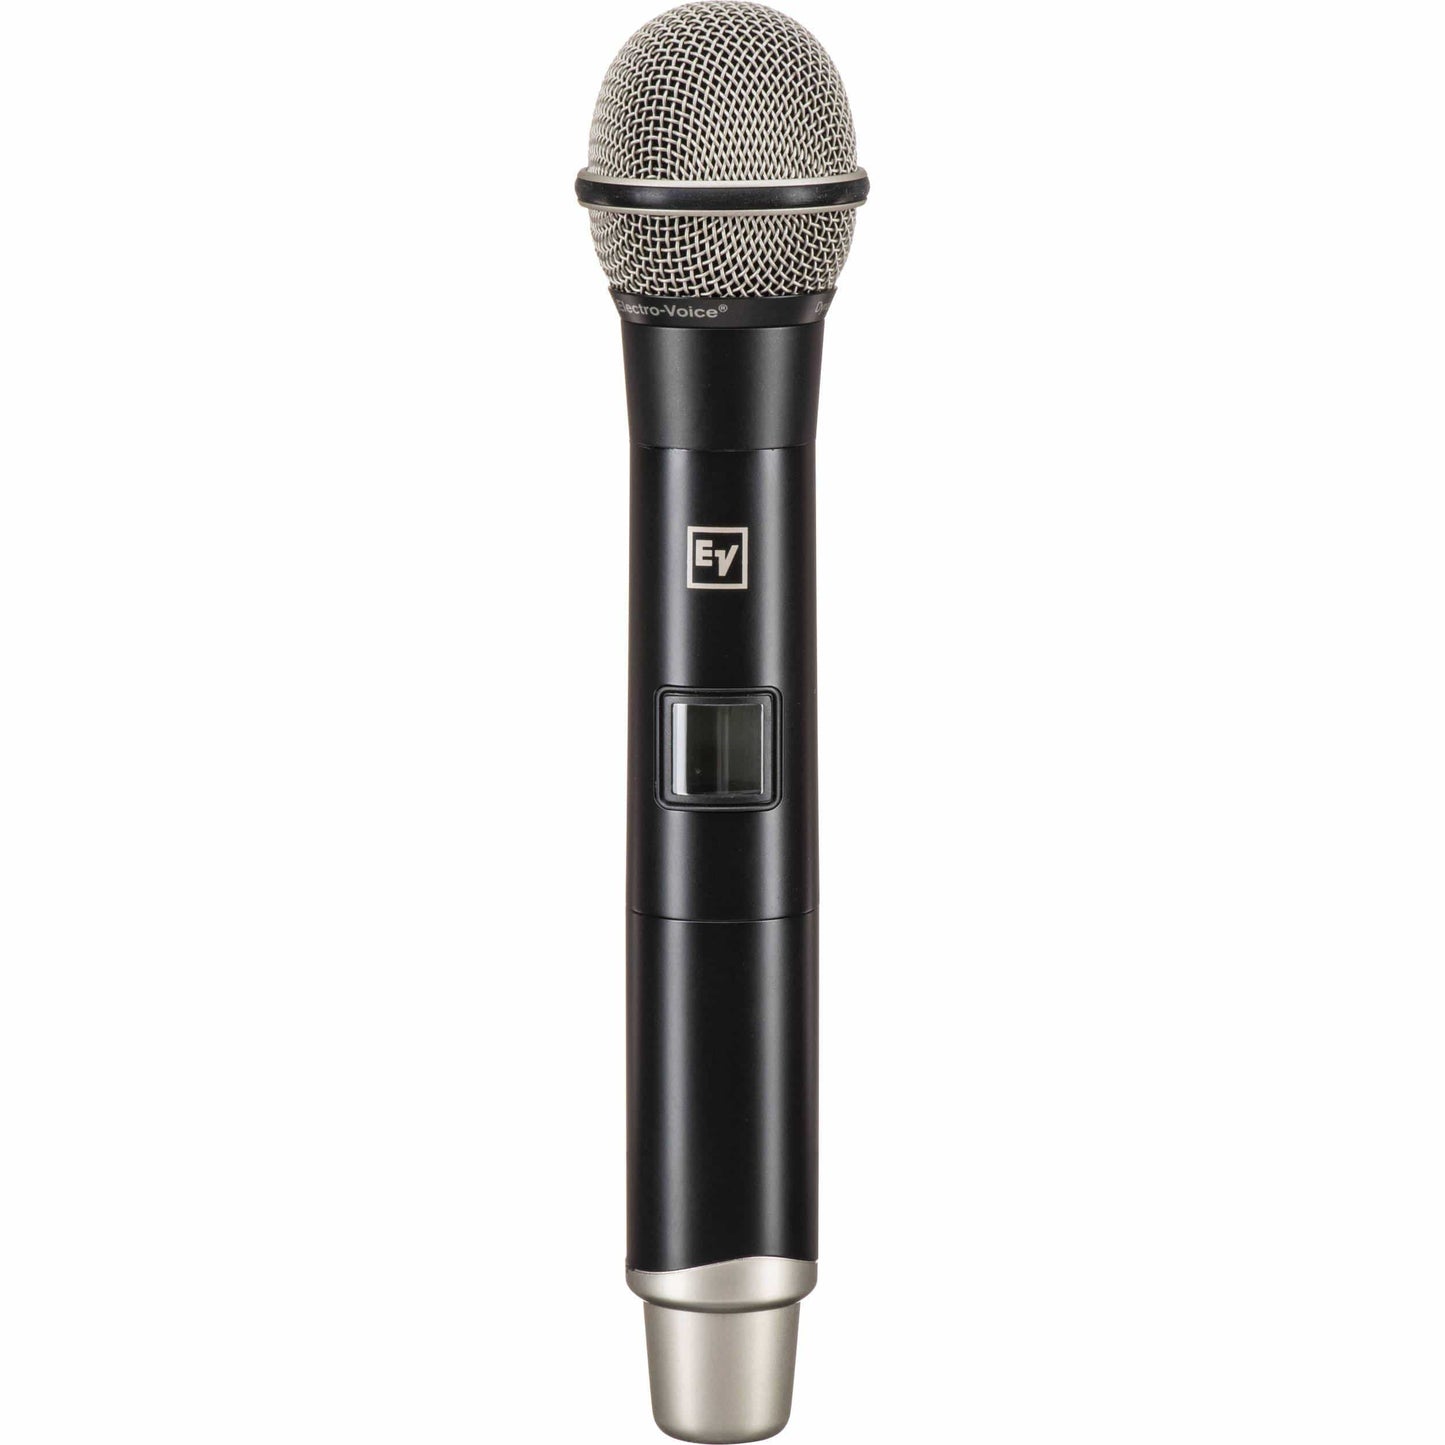 Electro-Voice HT-300-C Handheld PL22 Microphone Transmitter Band C (516 - 532 MHz) - PSSL ProSound and Stage Lighting